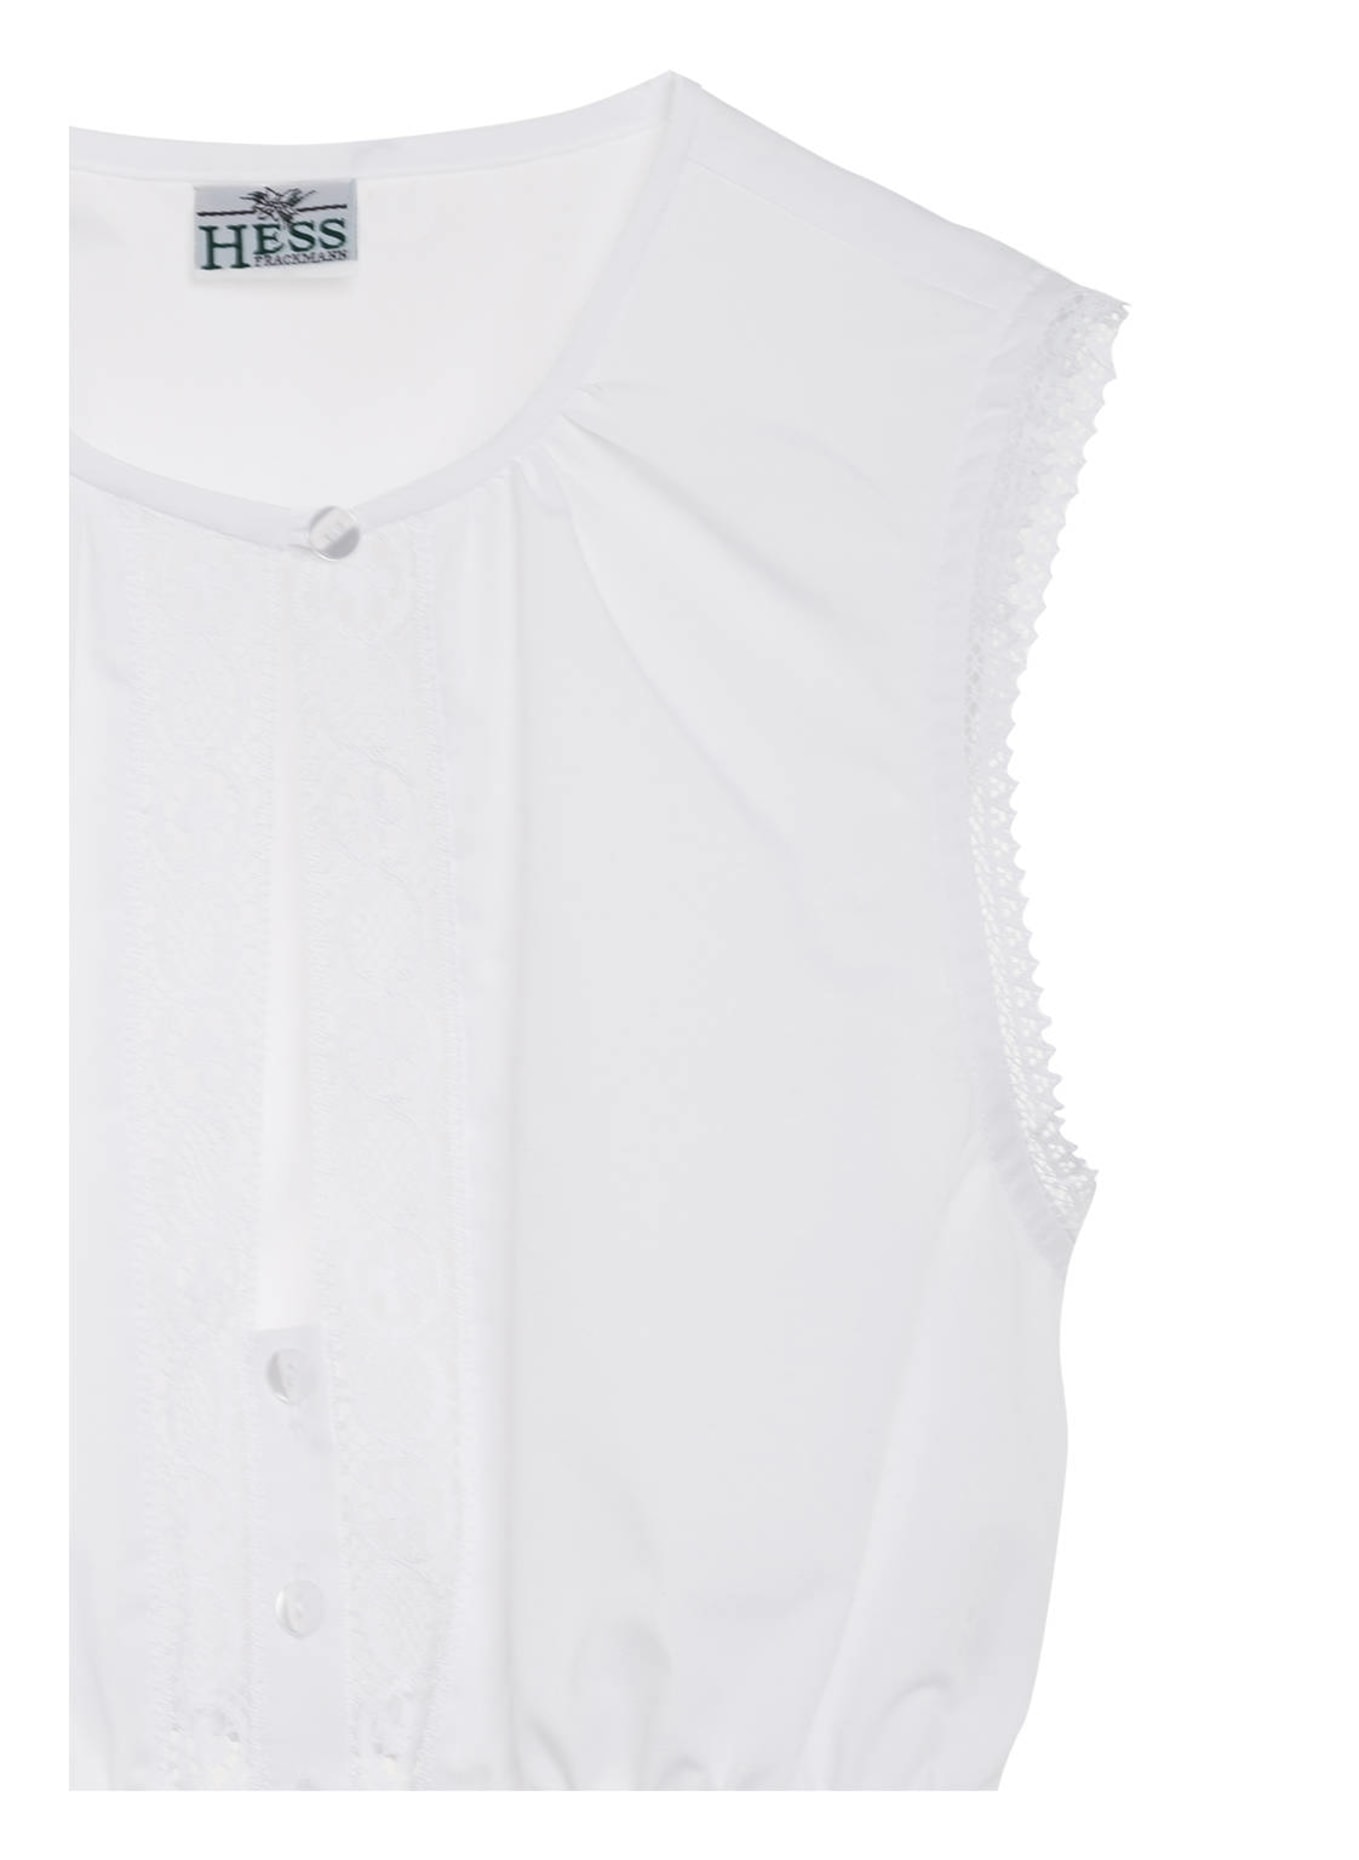 BERWIN & WOLFF Dirndl blouse with lace insert, Color: WHITE (Image 3)